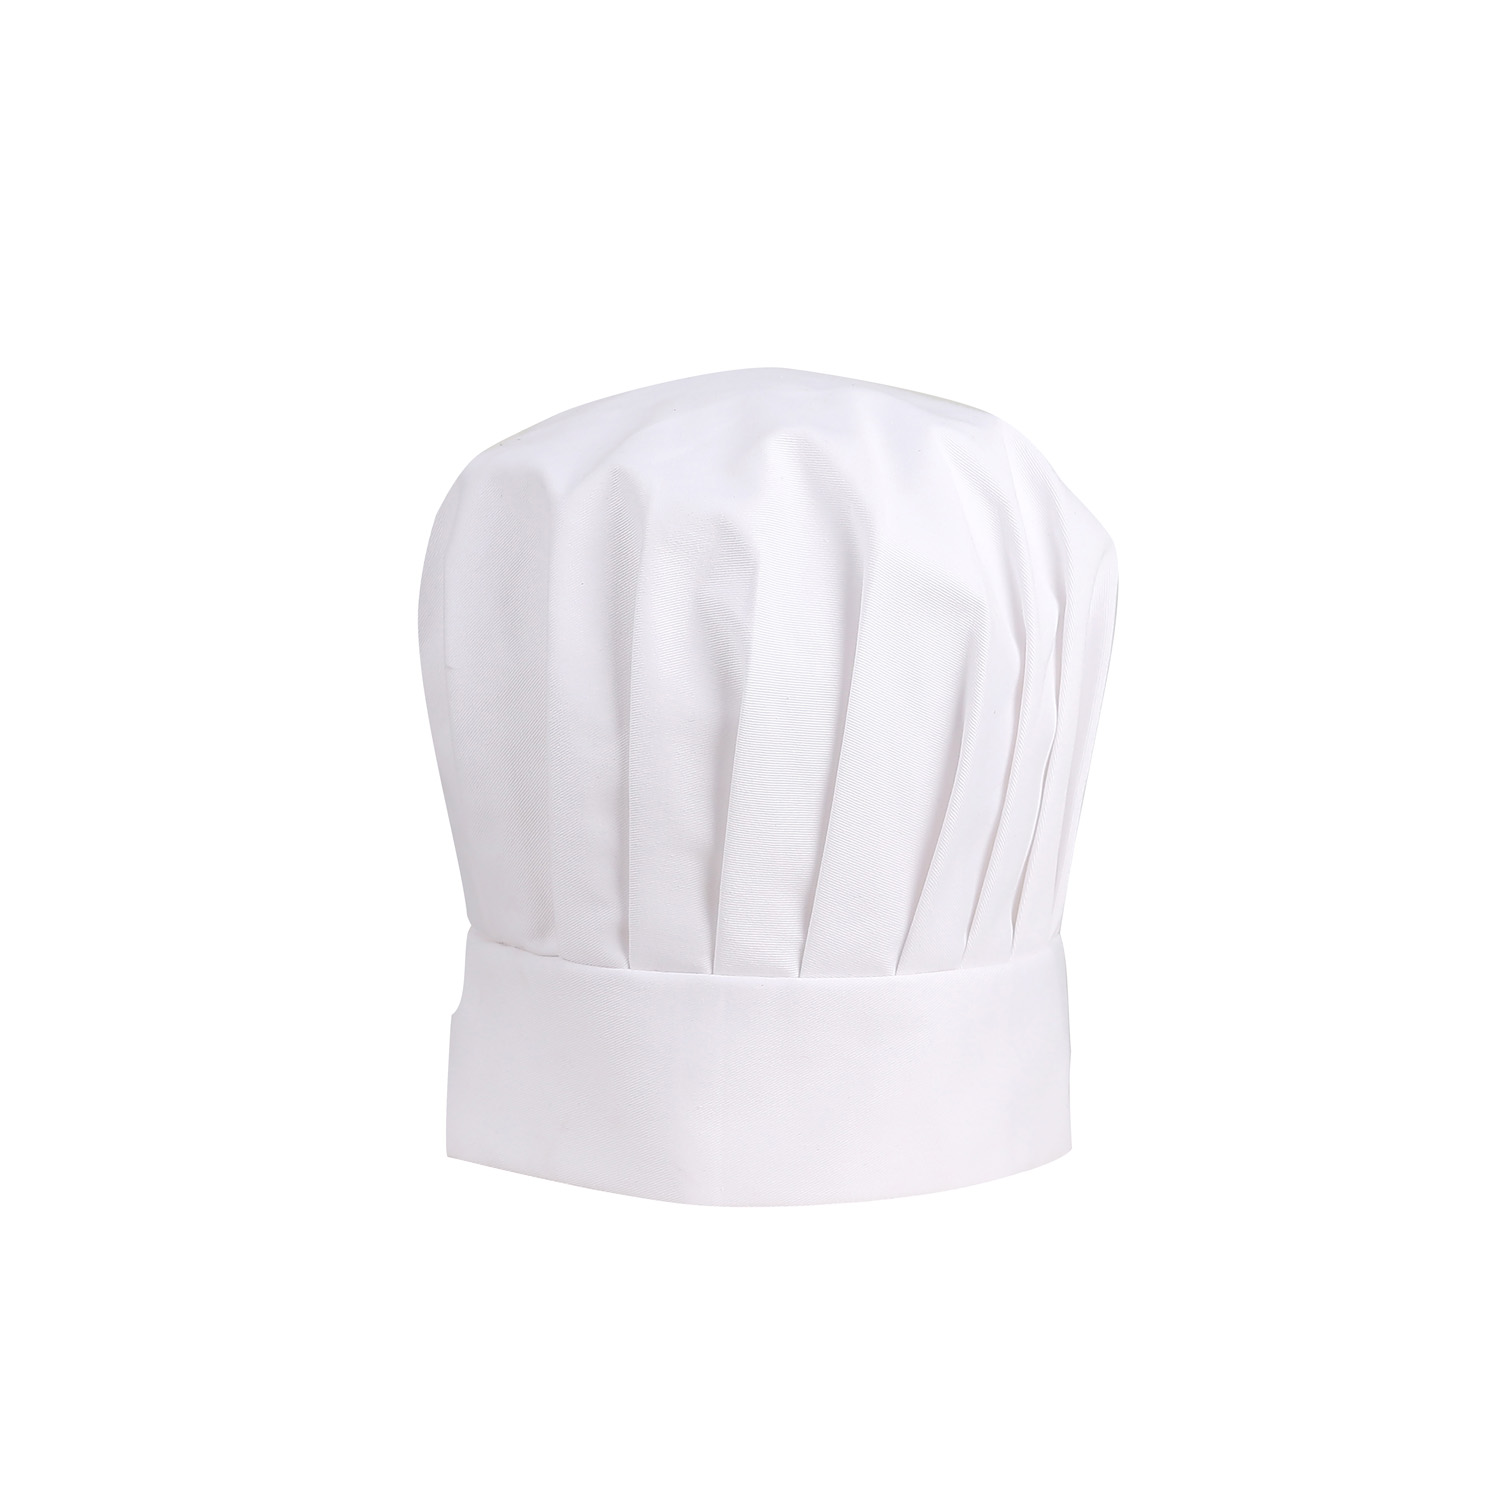 CAC China APHT-2WT Chef's Pride White Floppy Toque Hat 13" H